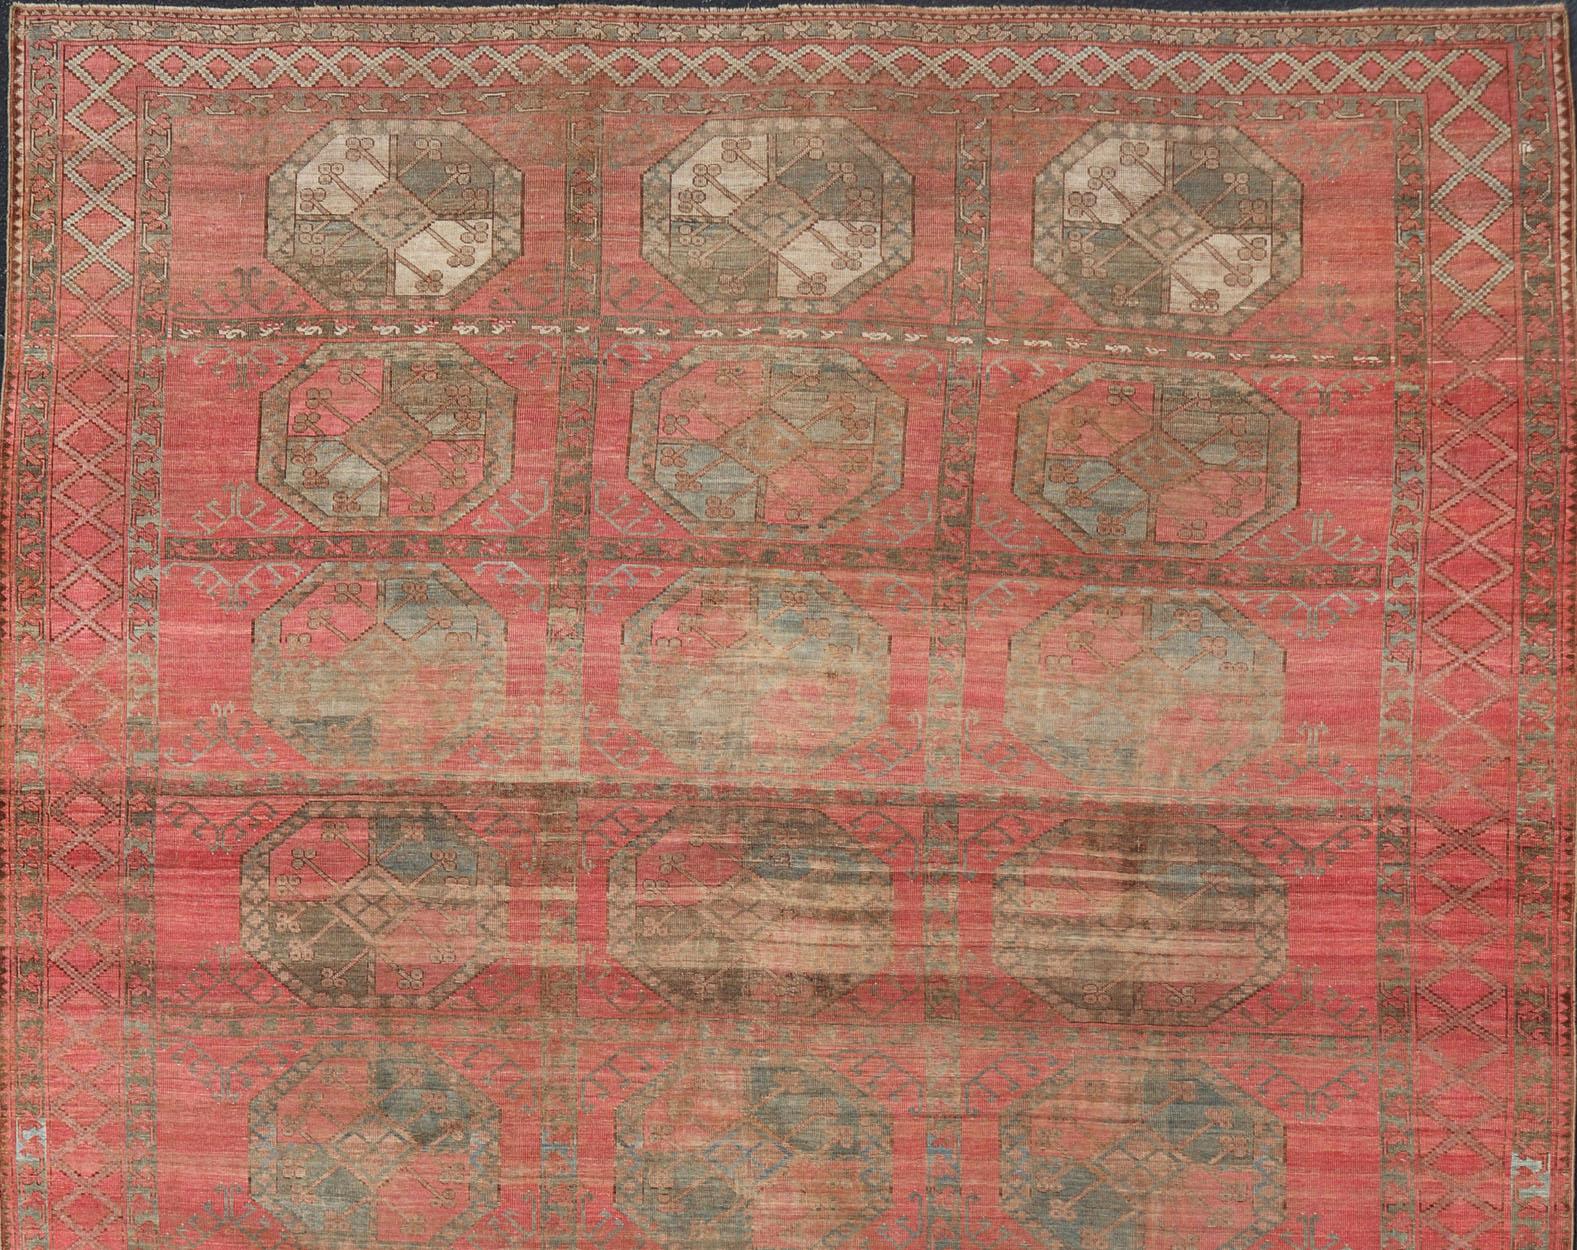 Large Turkomen Ersari Rug with All-Over Gul Design in Tan, Coral, and Brown For Sale 2